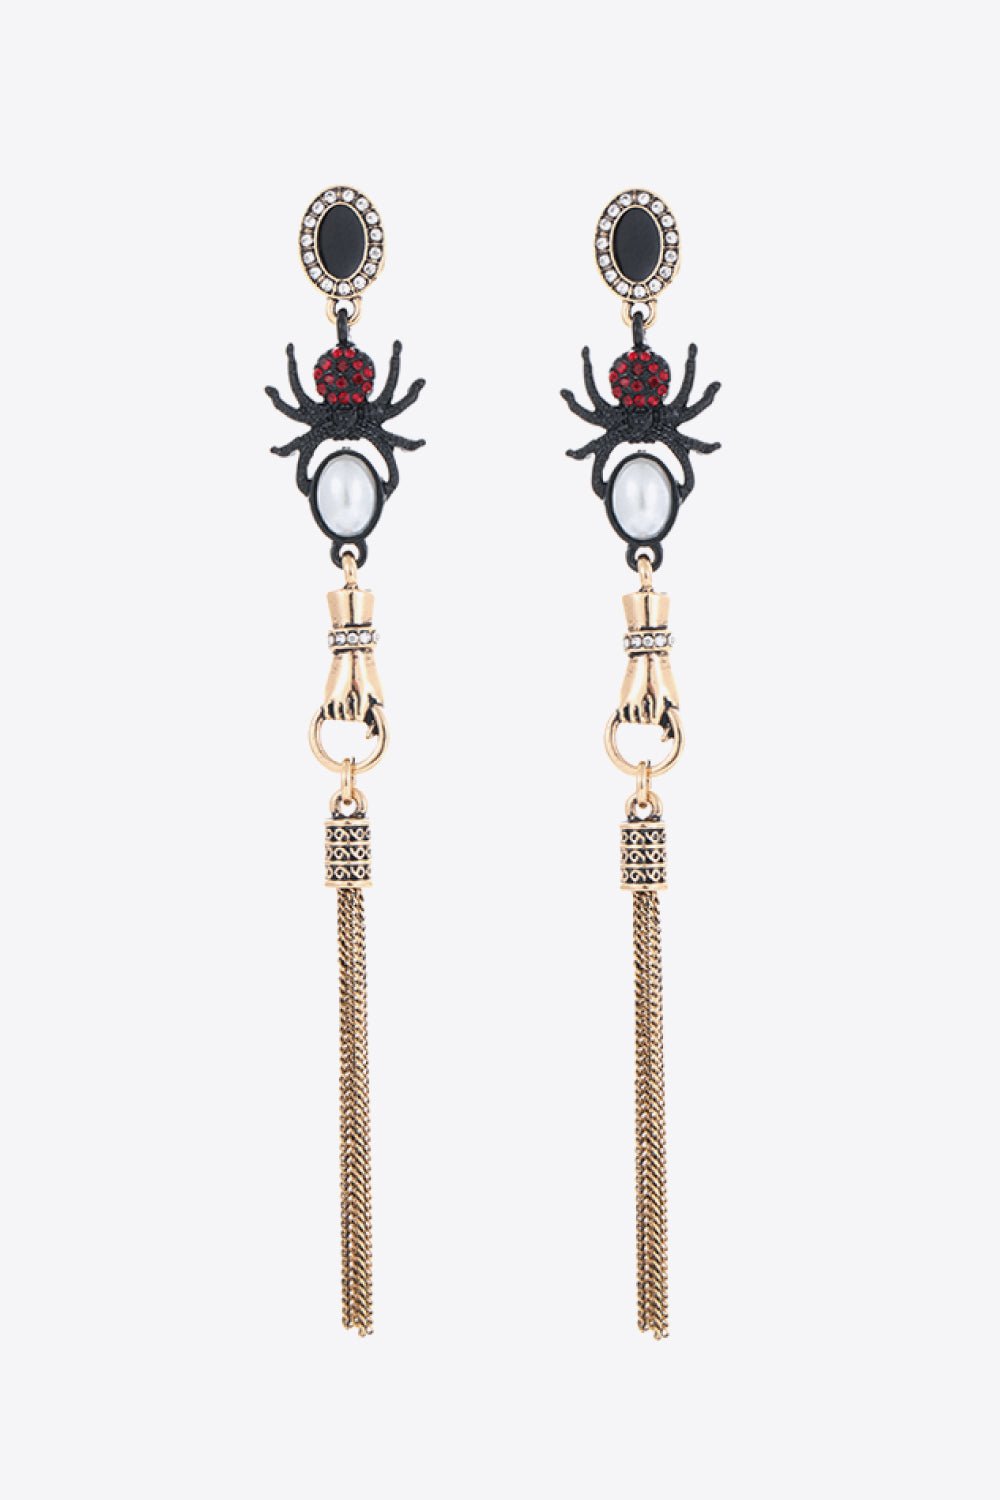 18K Gold-Plated Spider Drop Earrings - London's Closet Boutique